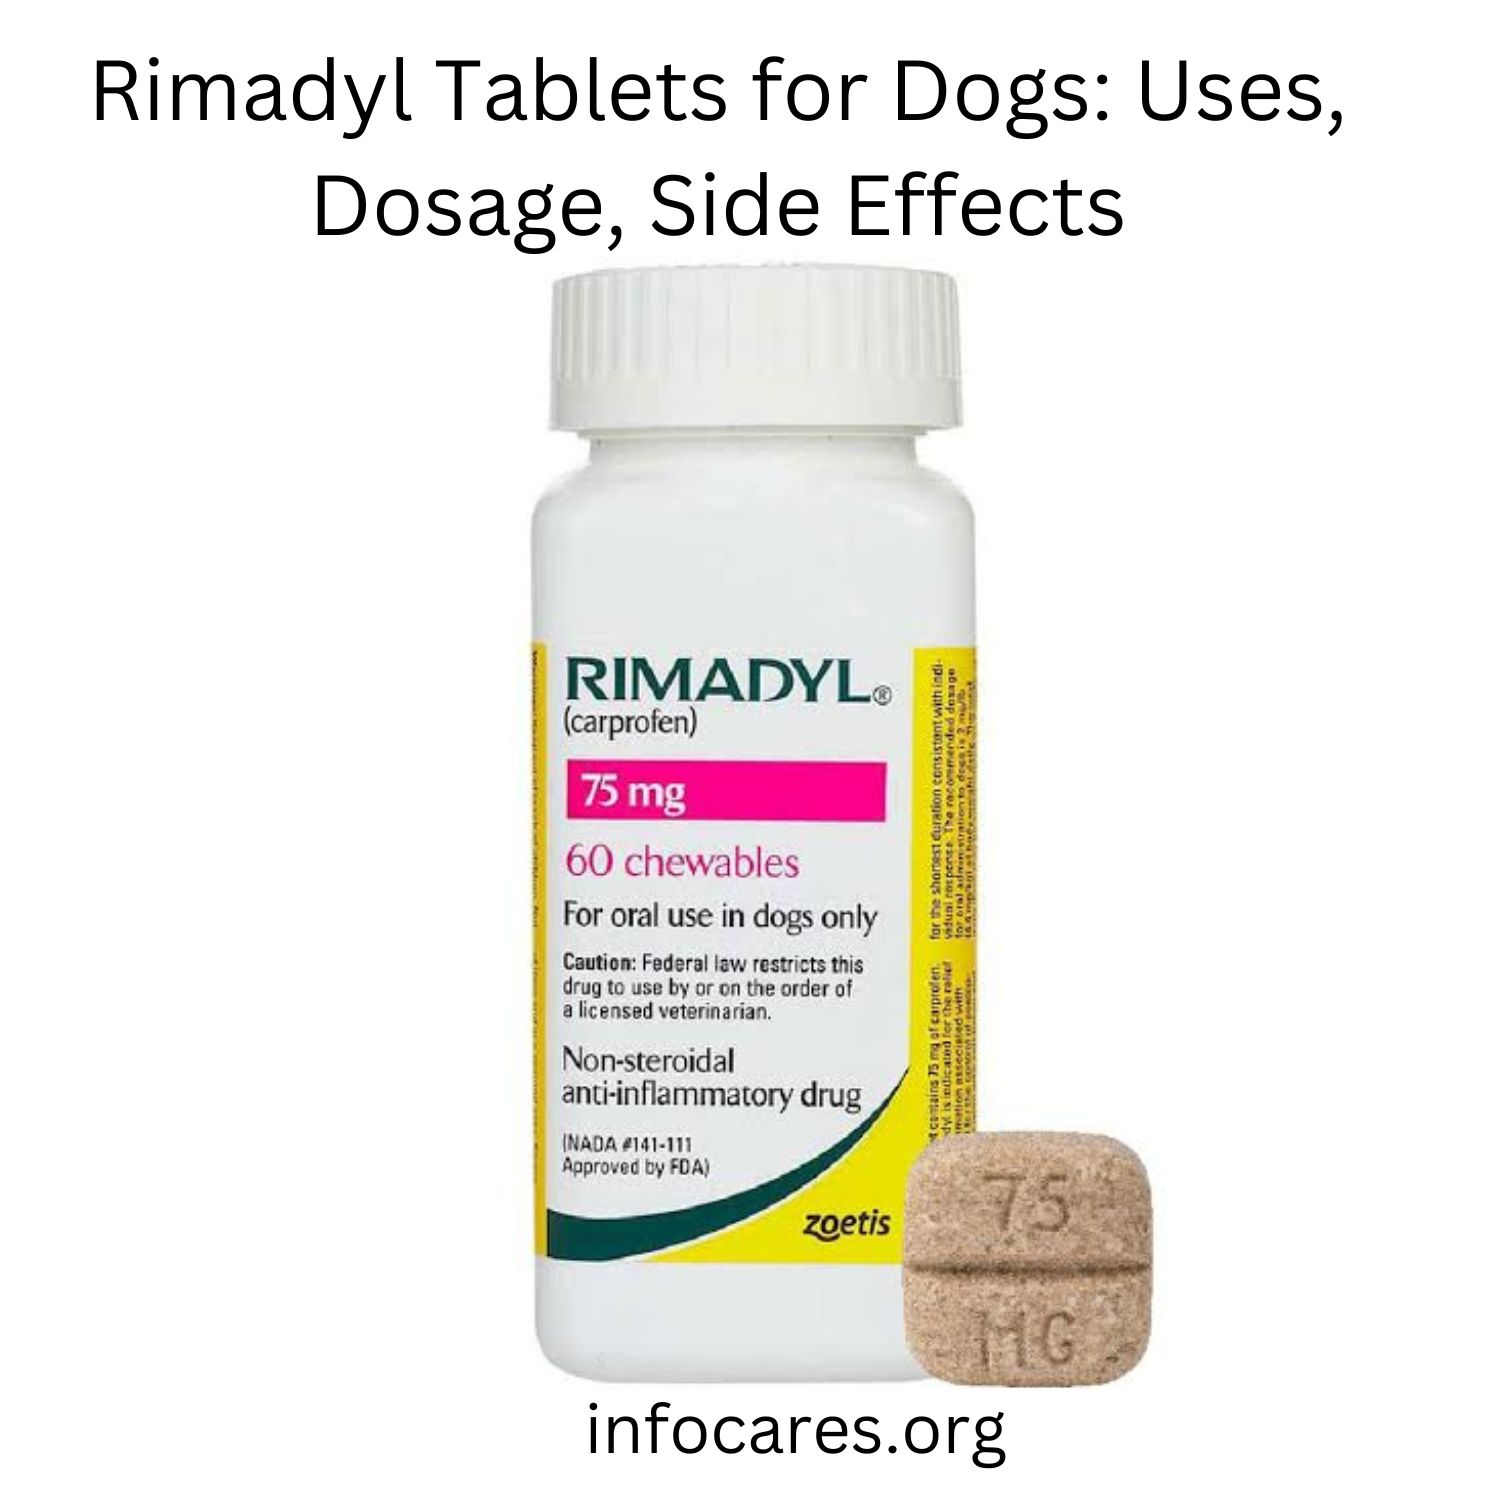 Rimadyl Tablets for Dogs